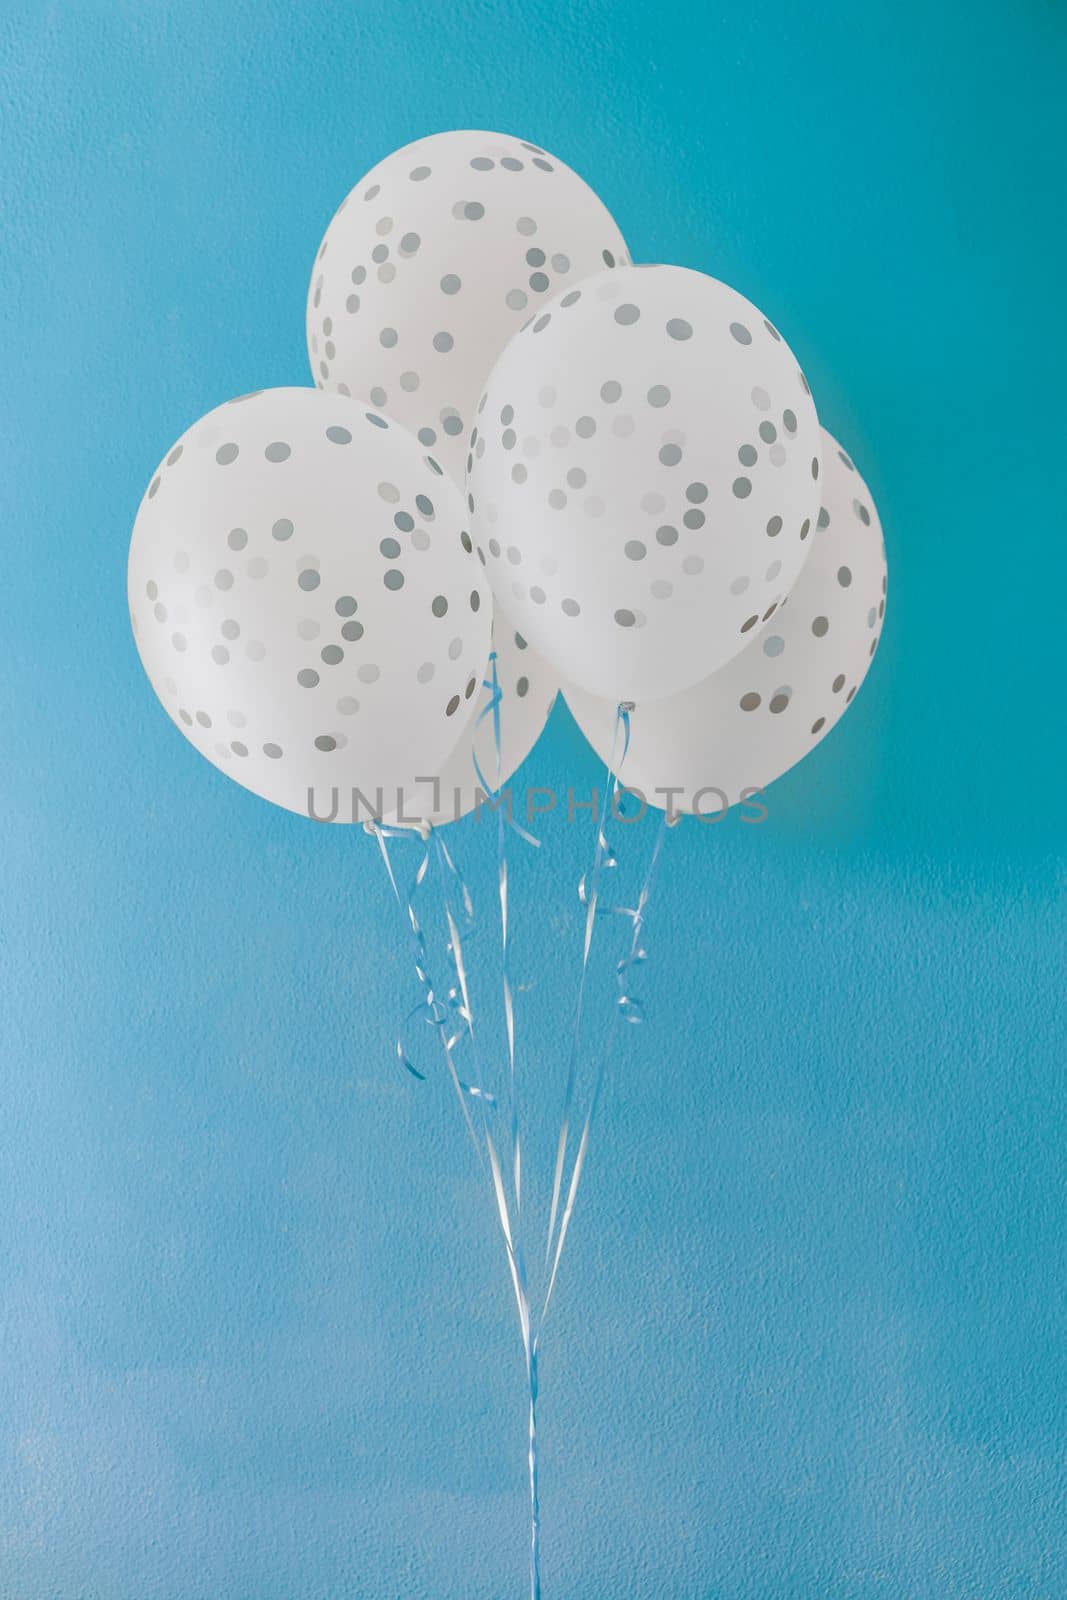 White helium balloons with gray dots on blue background. Several white and gray spotted holiday balloons on metal ribbons against blue painted wall that looks like clear sky. Birthday present. by apavlin